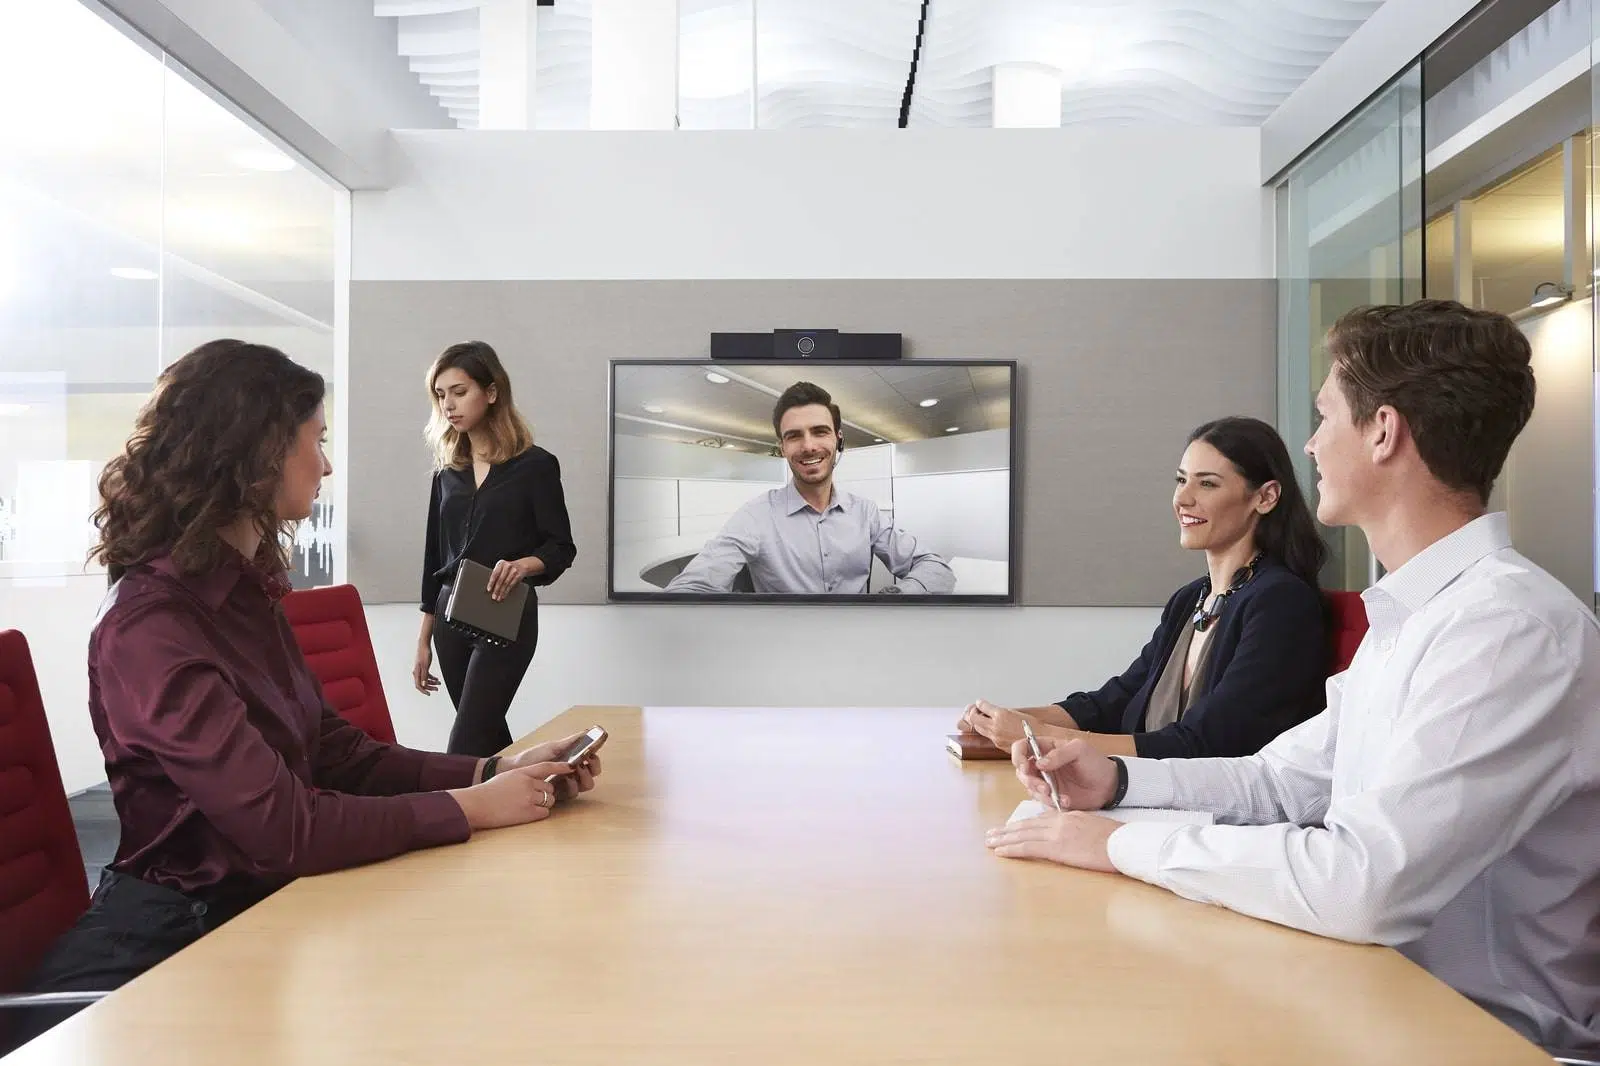 Poly USB Cameras & Soundbars Are Perfect For Small To Medium Conference Rooms